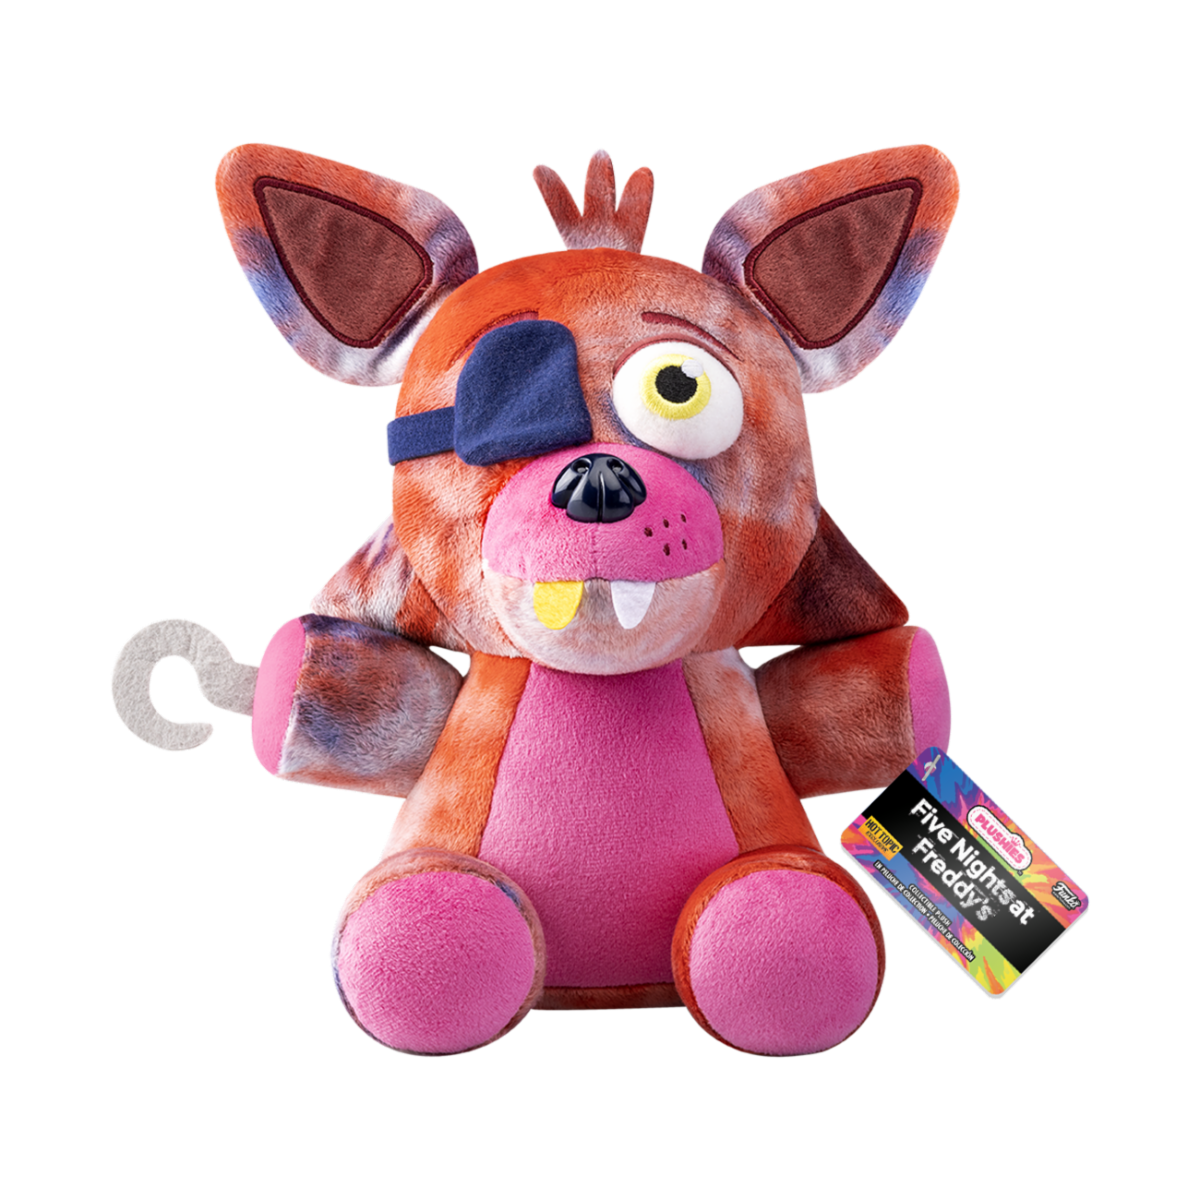 Funko Plush Five Nights at Freddy's Fanverse Candy the Cat